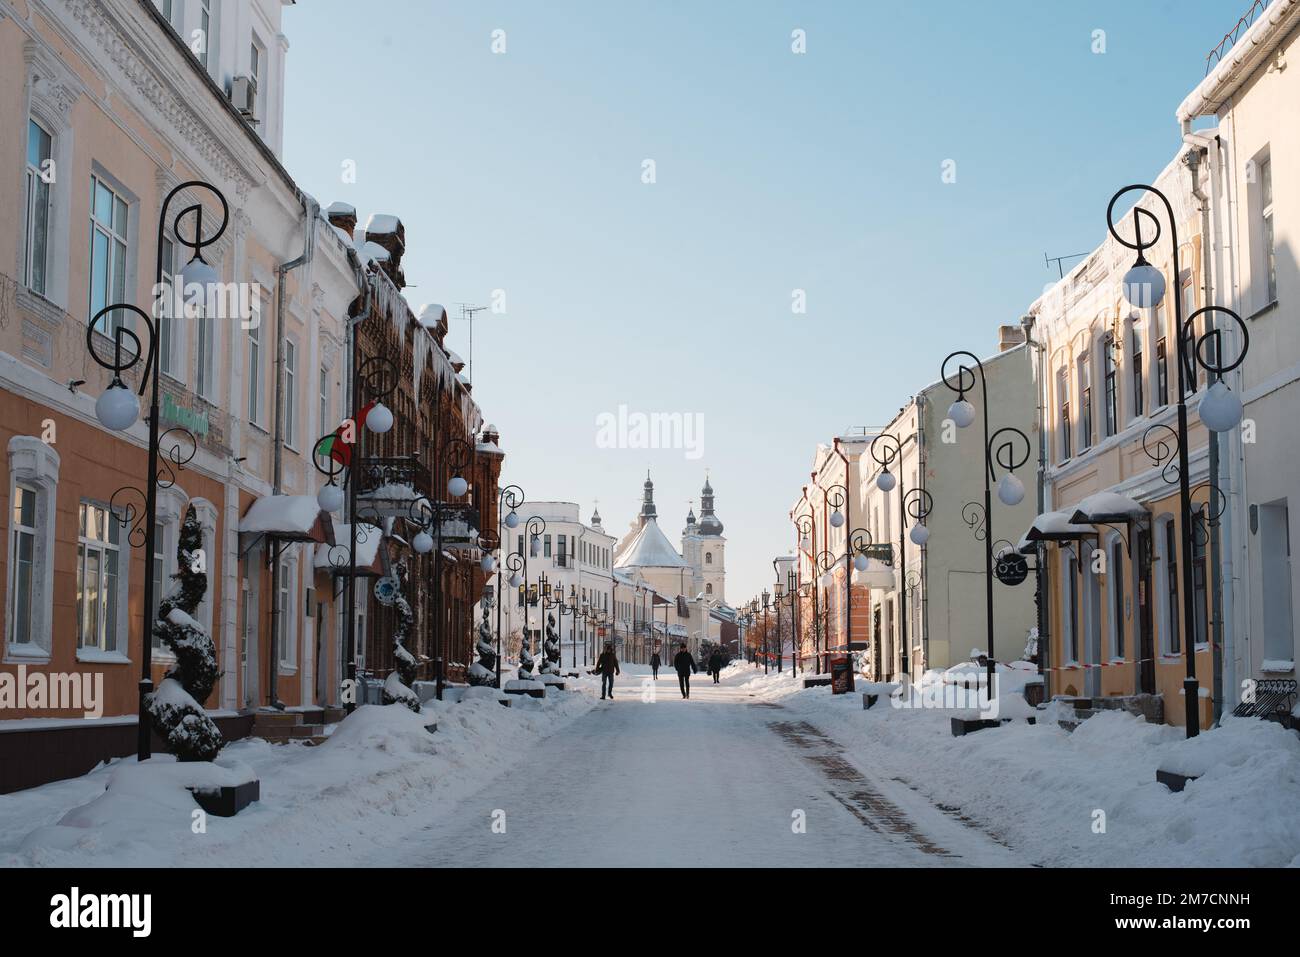 old town on a snowy day Stock Photo